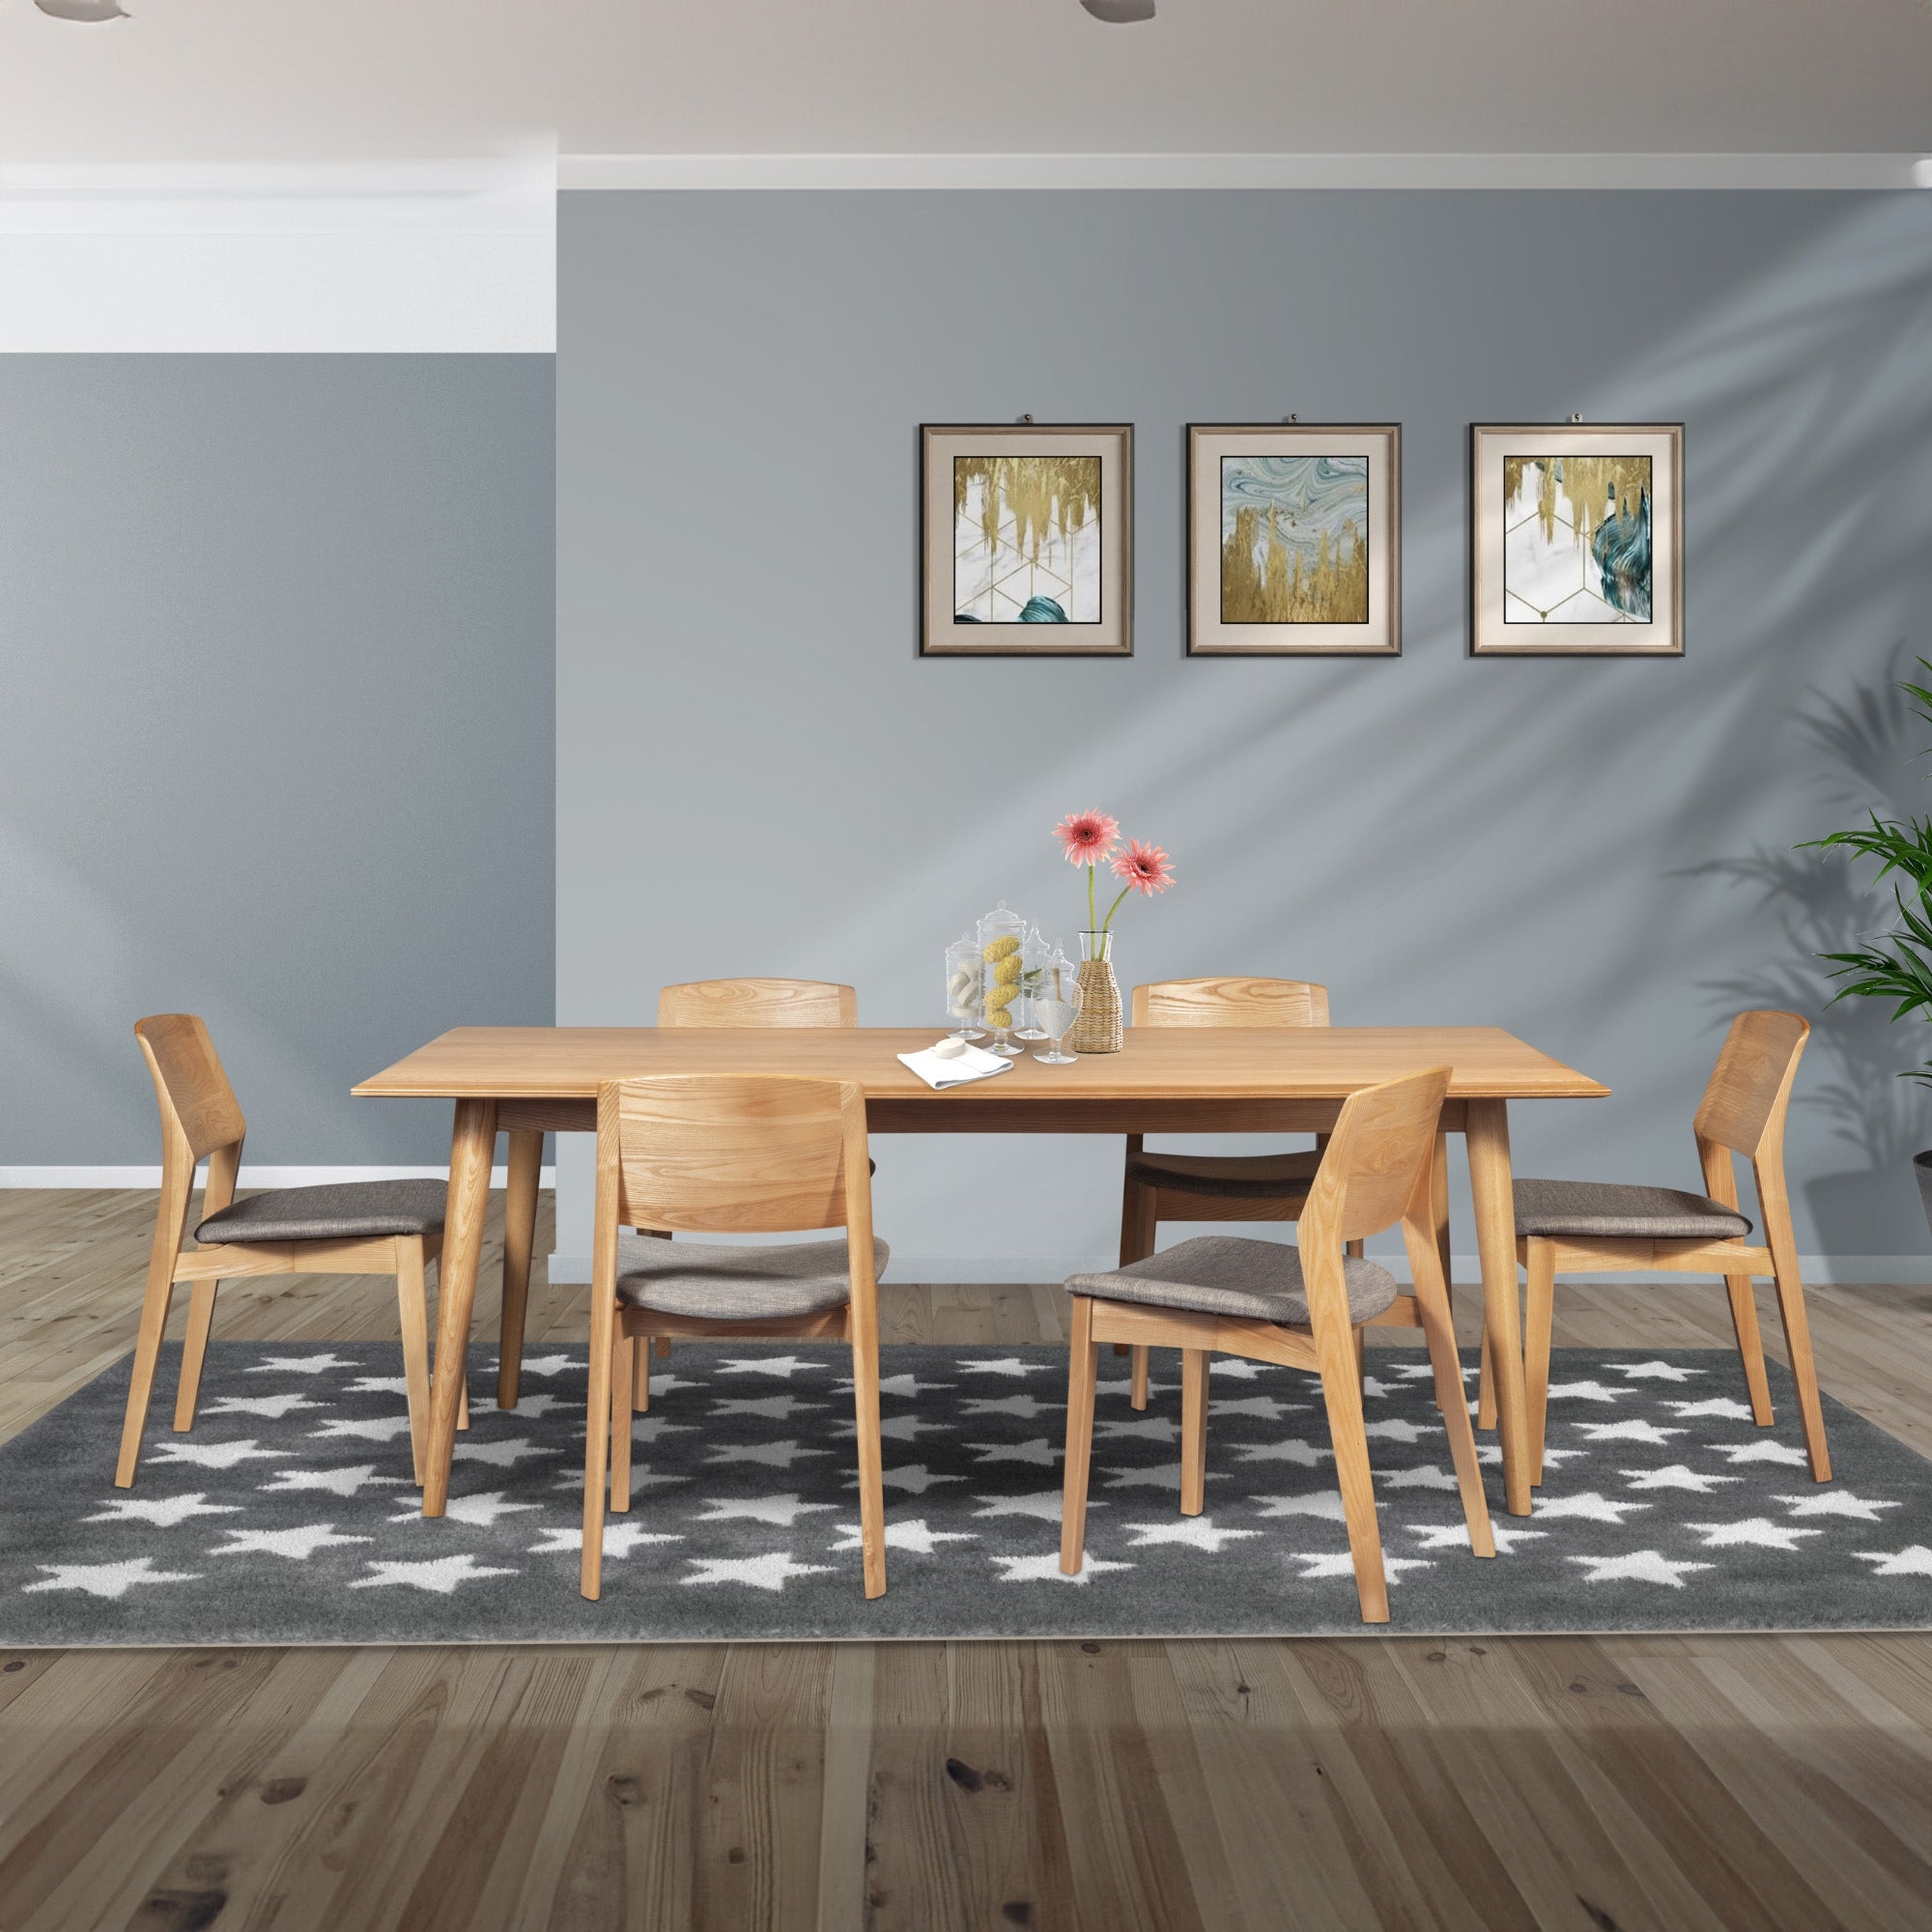 8-Seater Dining Table Set, Solid Ash Wood, Fabric Chairs, Oak